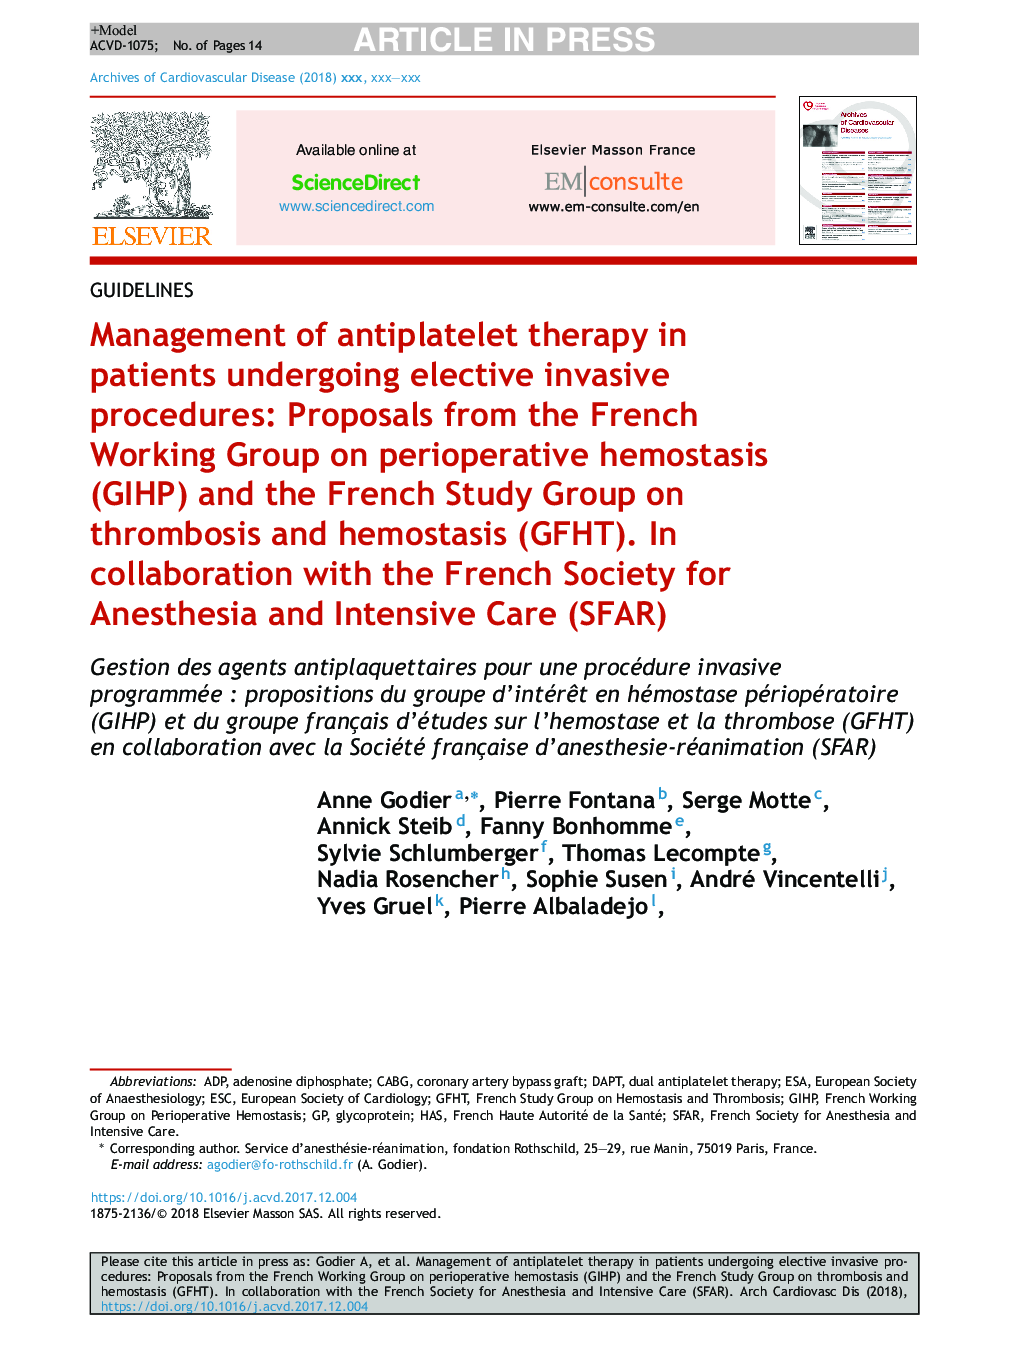 Management of antiplatelet therapy in patients undergoing elective invasive procedures: Proposals from the French Working Group on perioperative hemostasis (GIHP) and the French Study Group on thrombosis and hemostasis (GFHT). In collaboration with the Fr